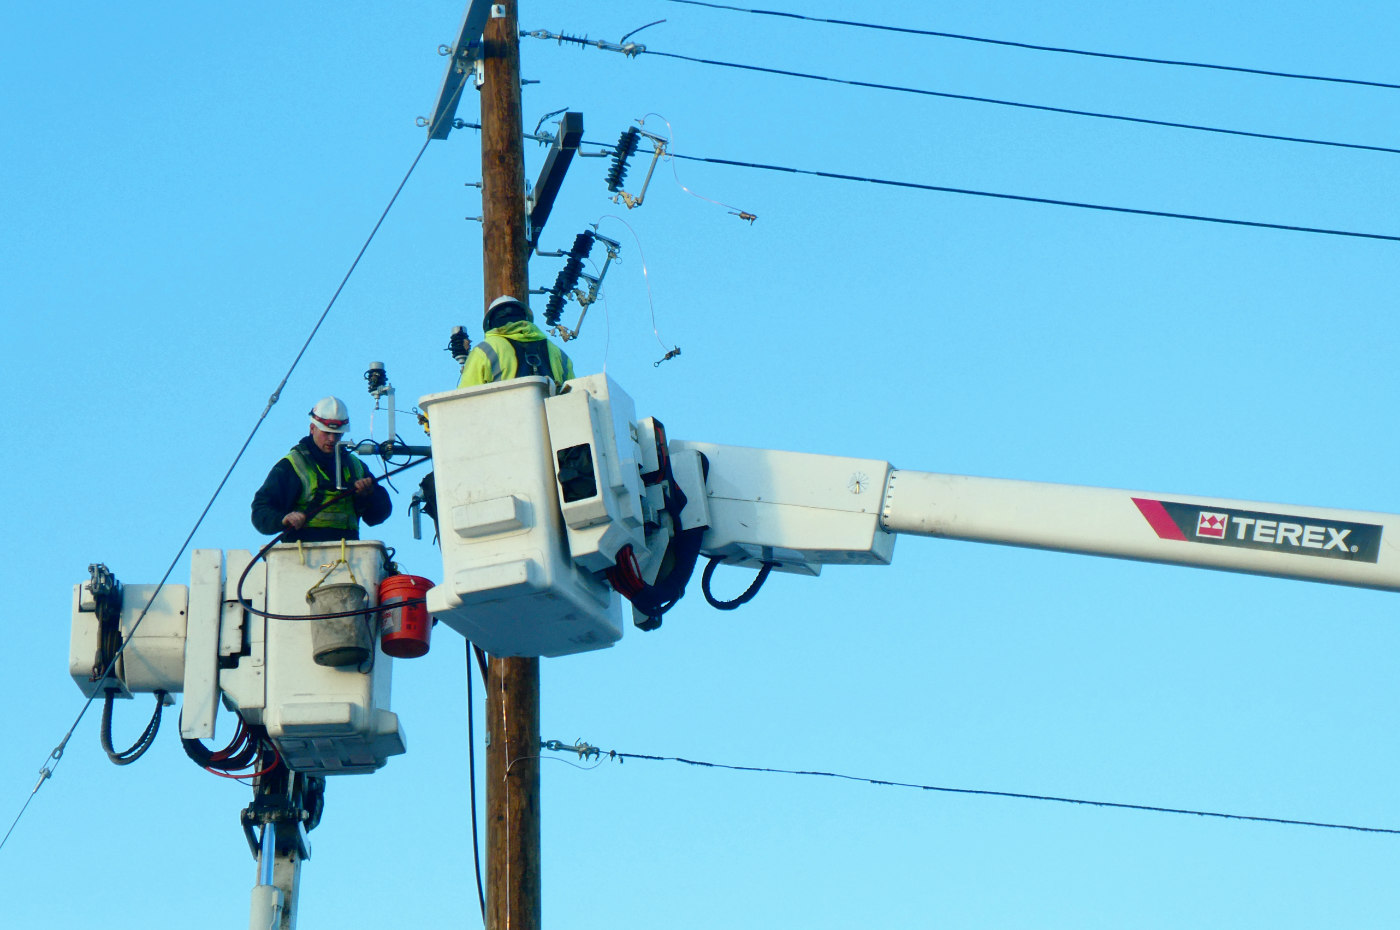 two men in white cherry pickers working on telephone pole wiring against a bright blue sky